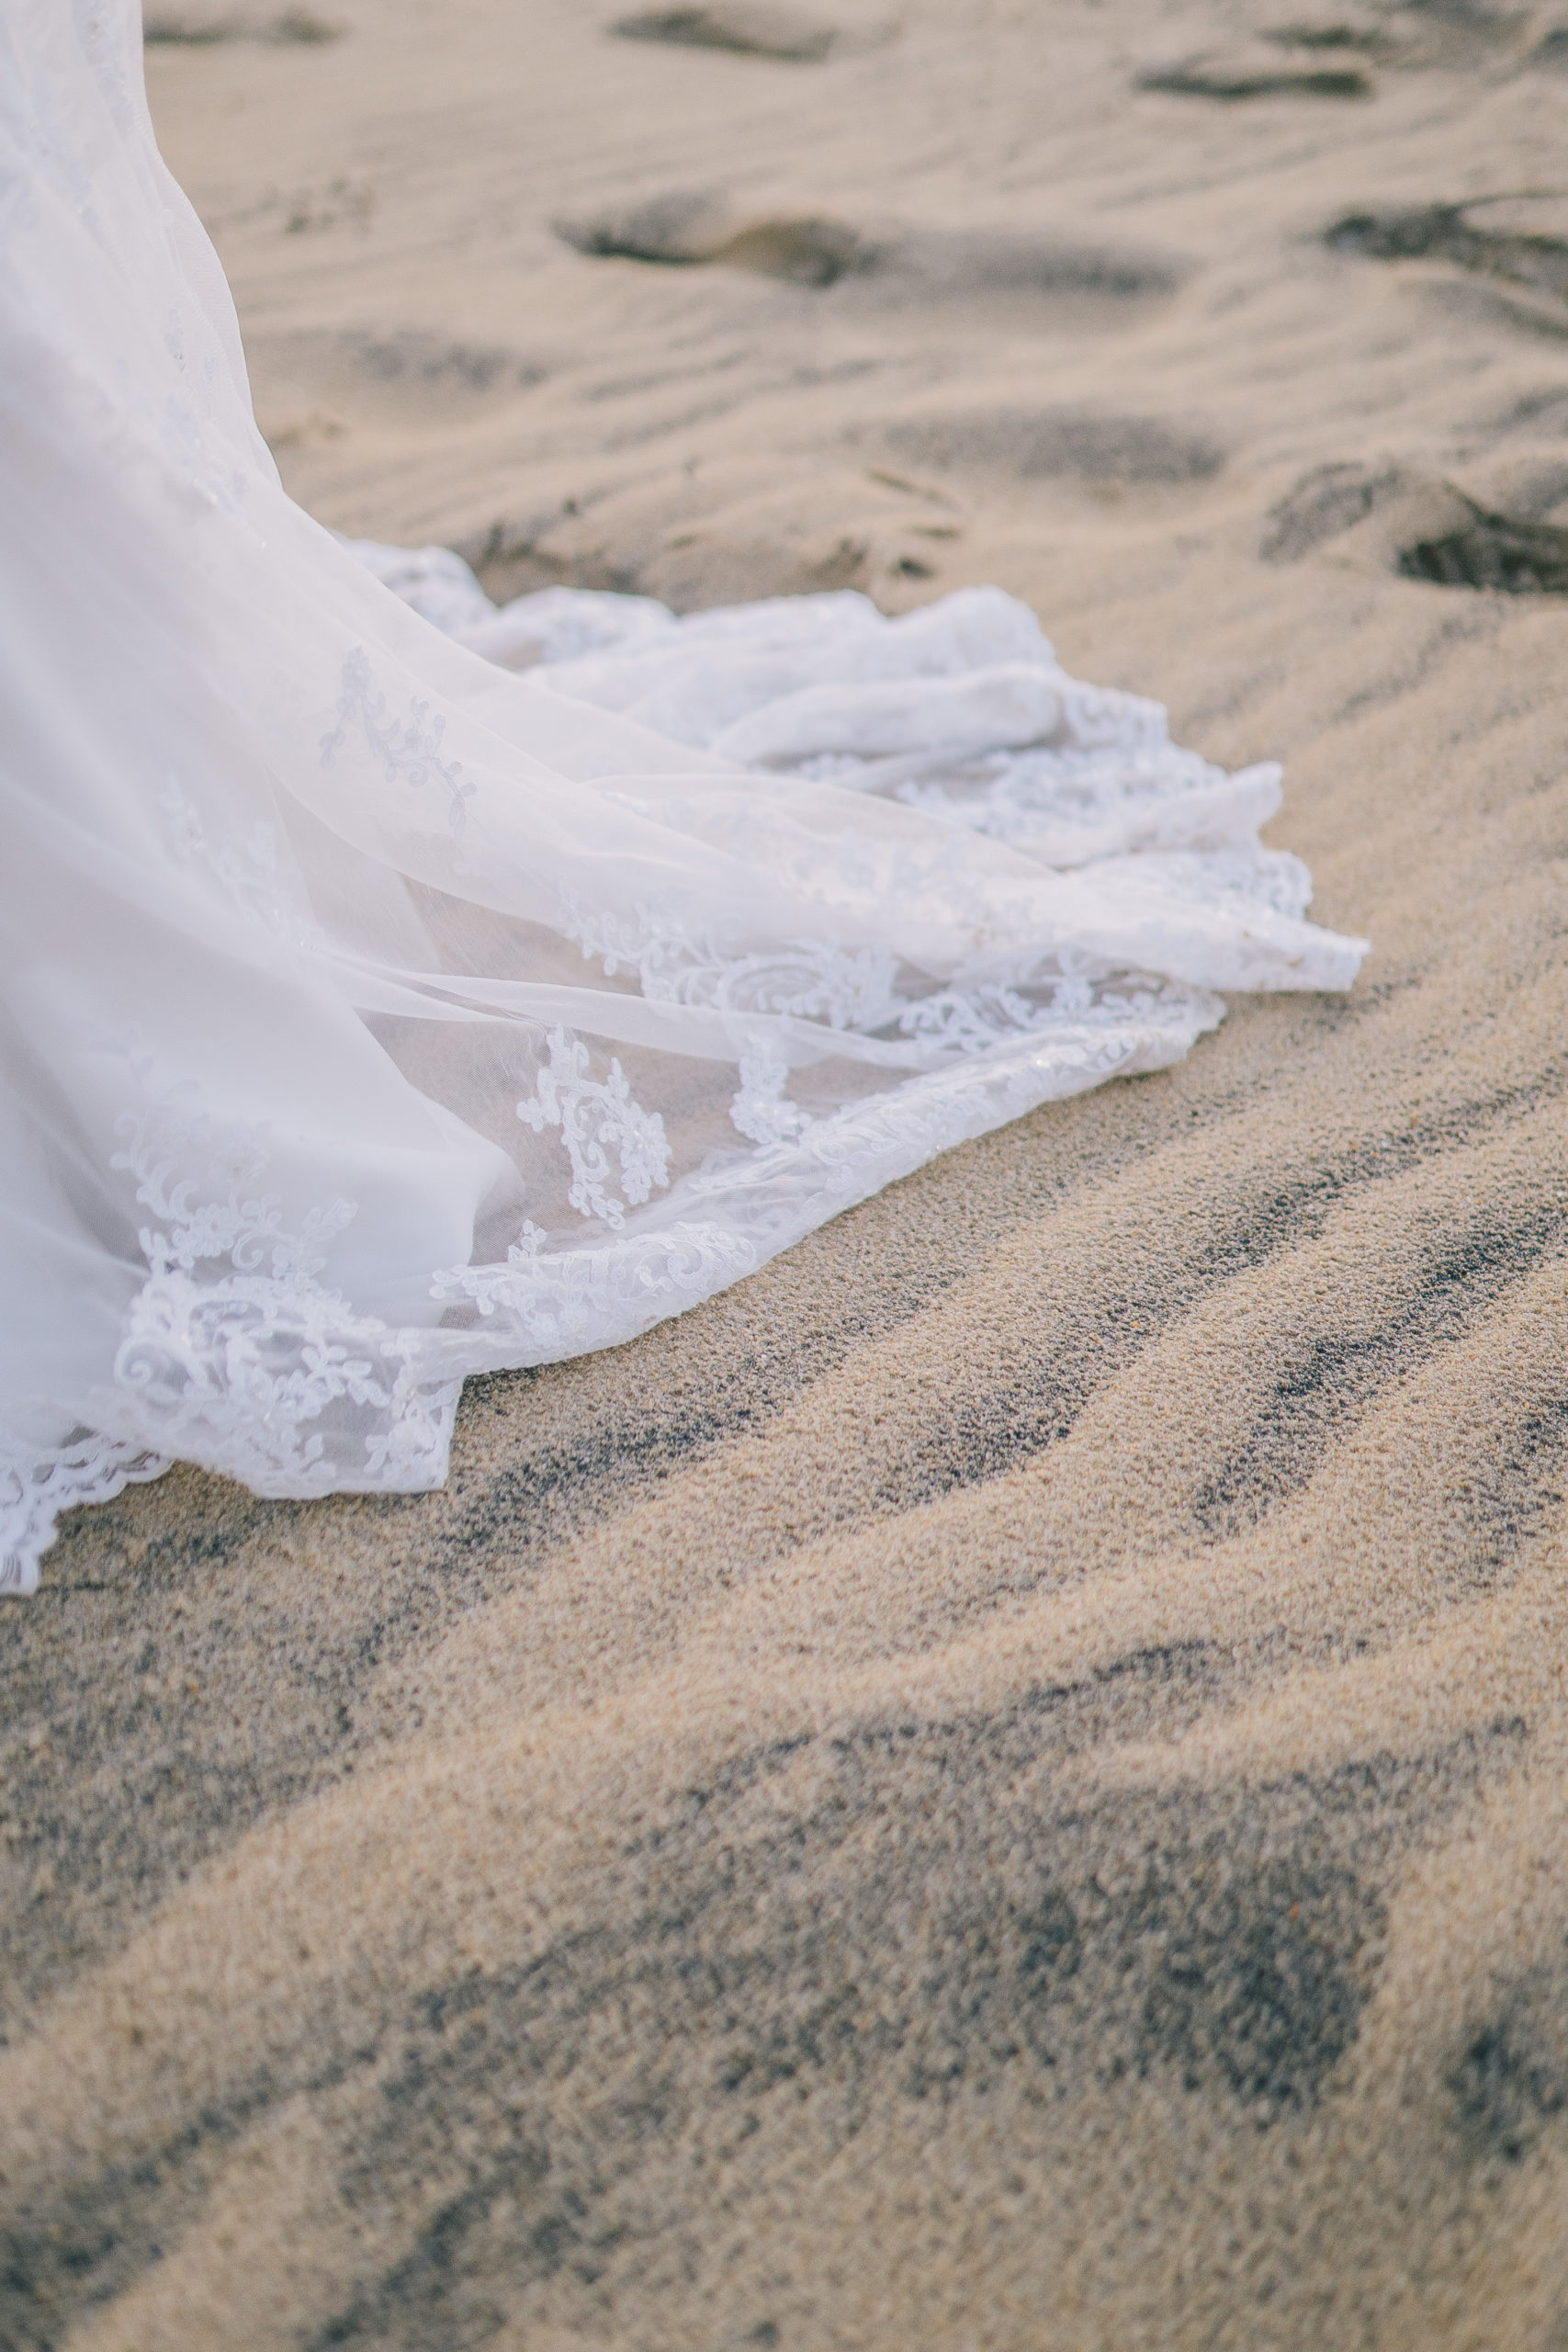 brides lace train across the sand as she walks.